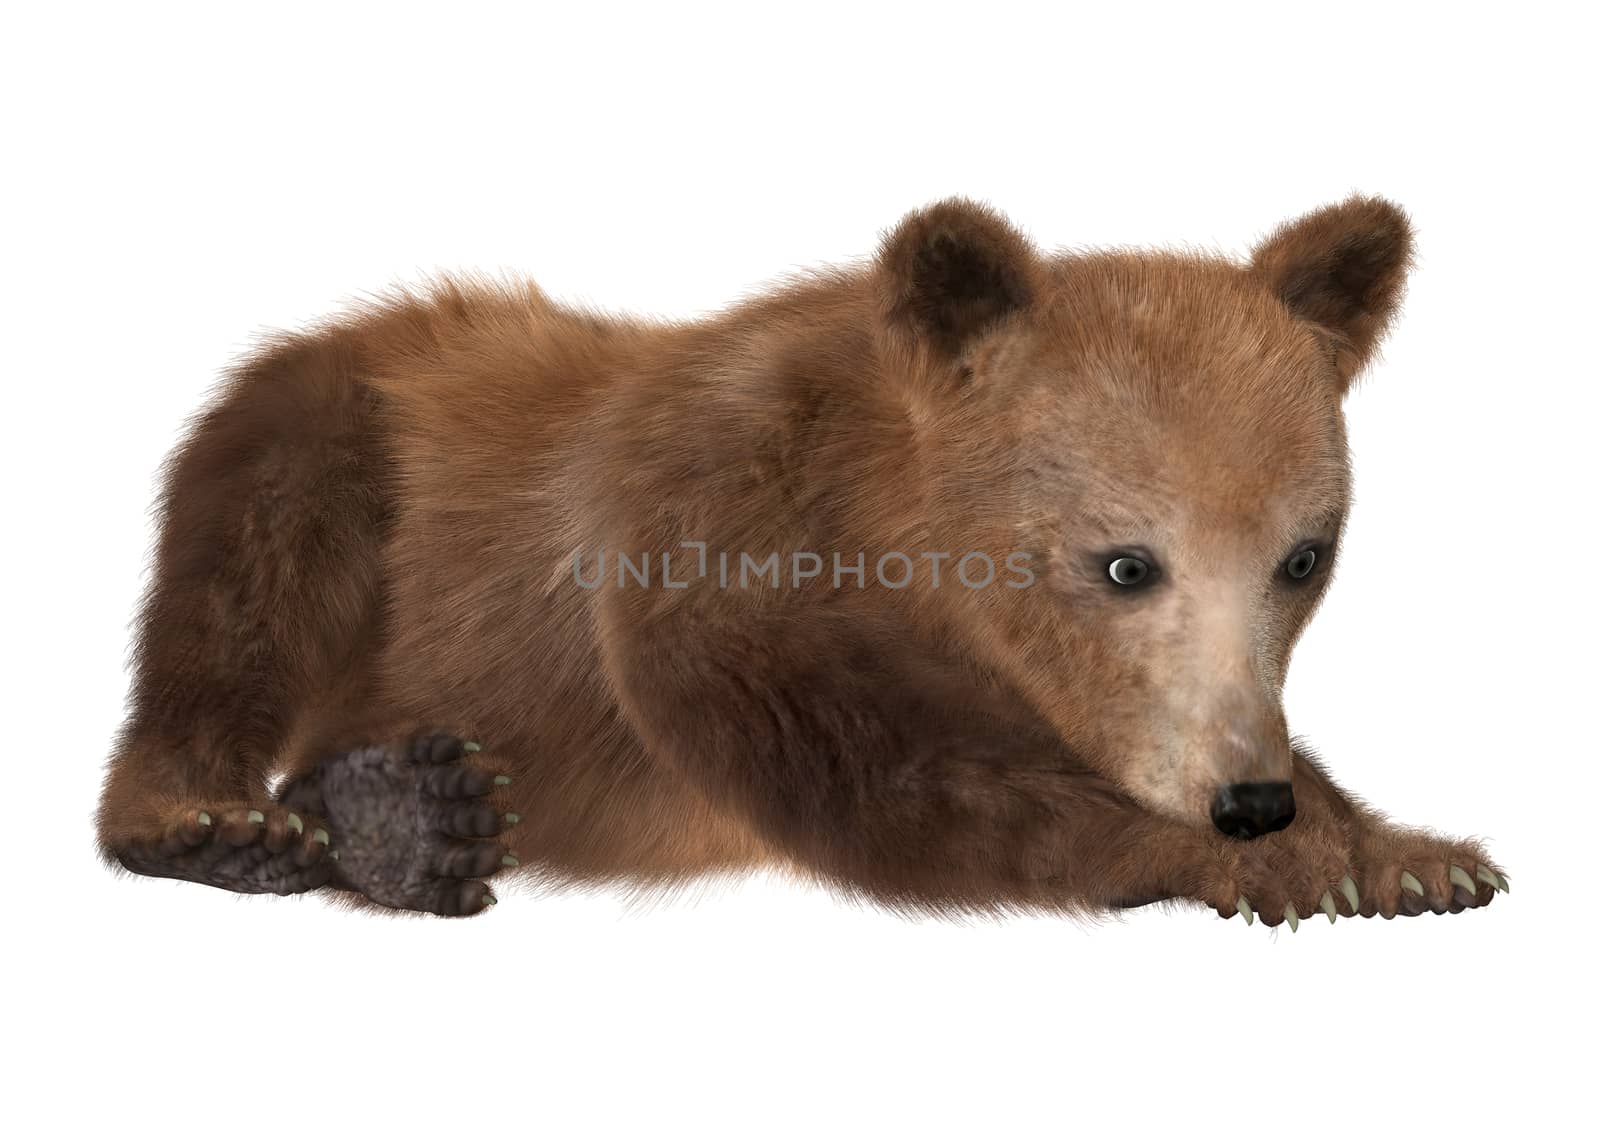 3D digital render of a brown bear cub isolated on white background